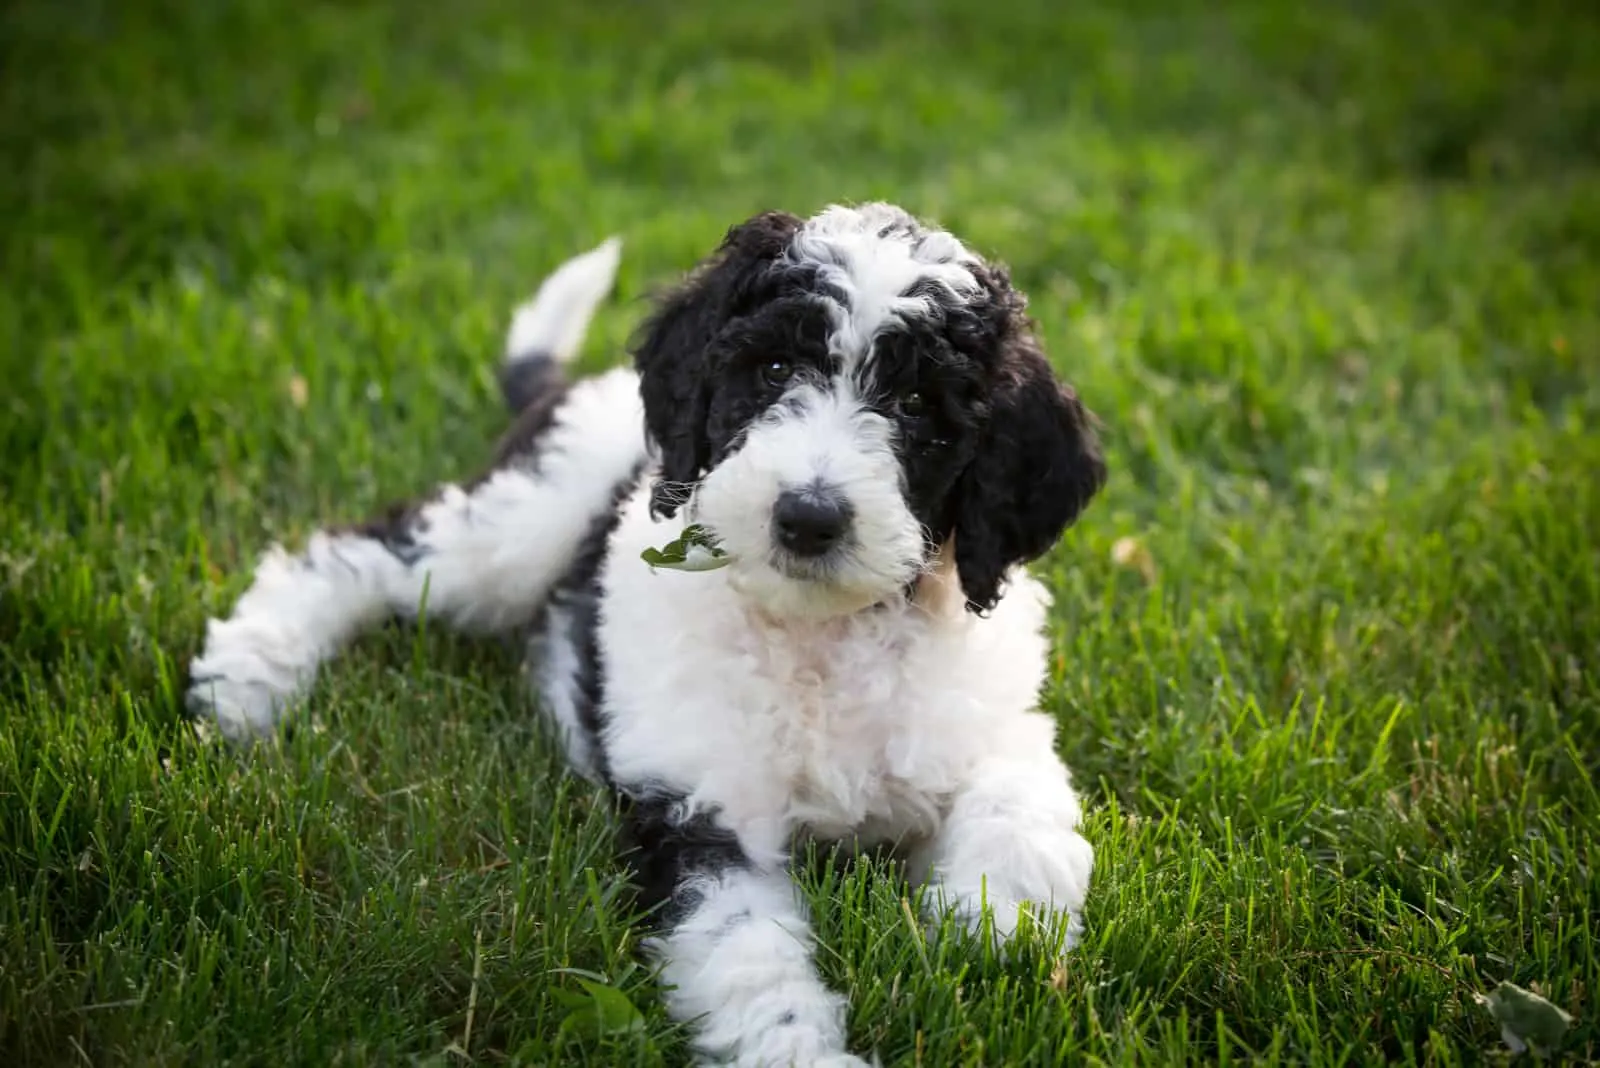 Sheepadoodle puppy six weeks old sitting in the yard